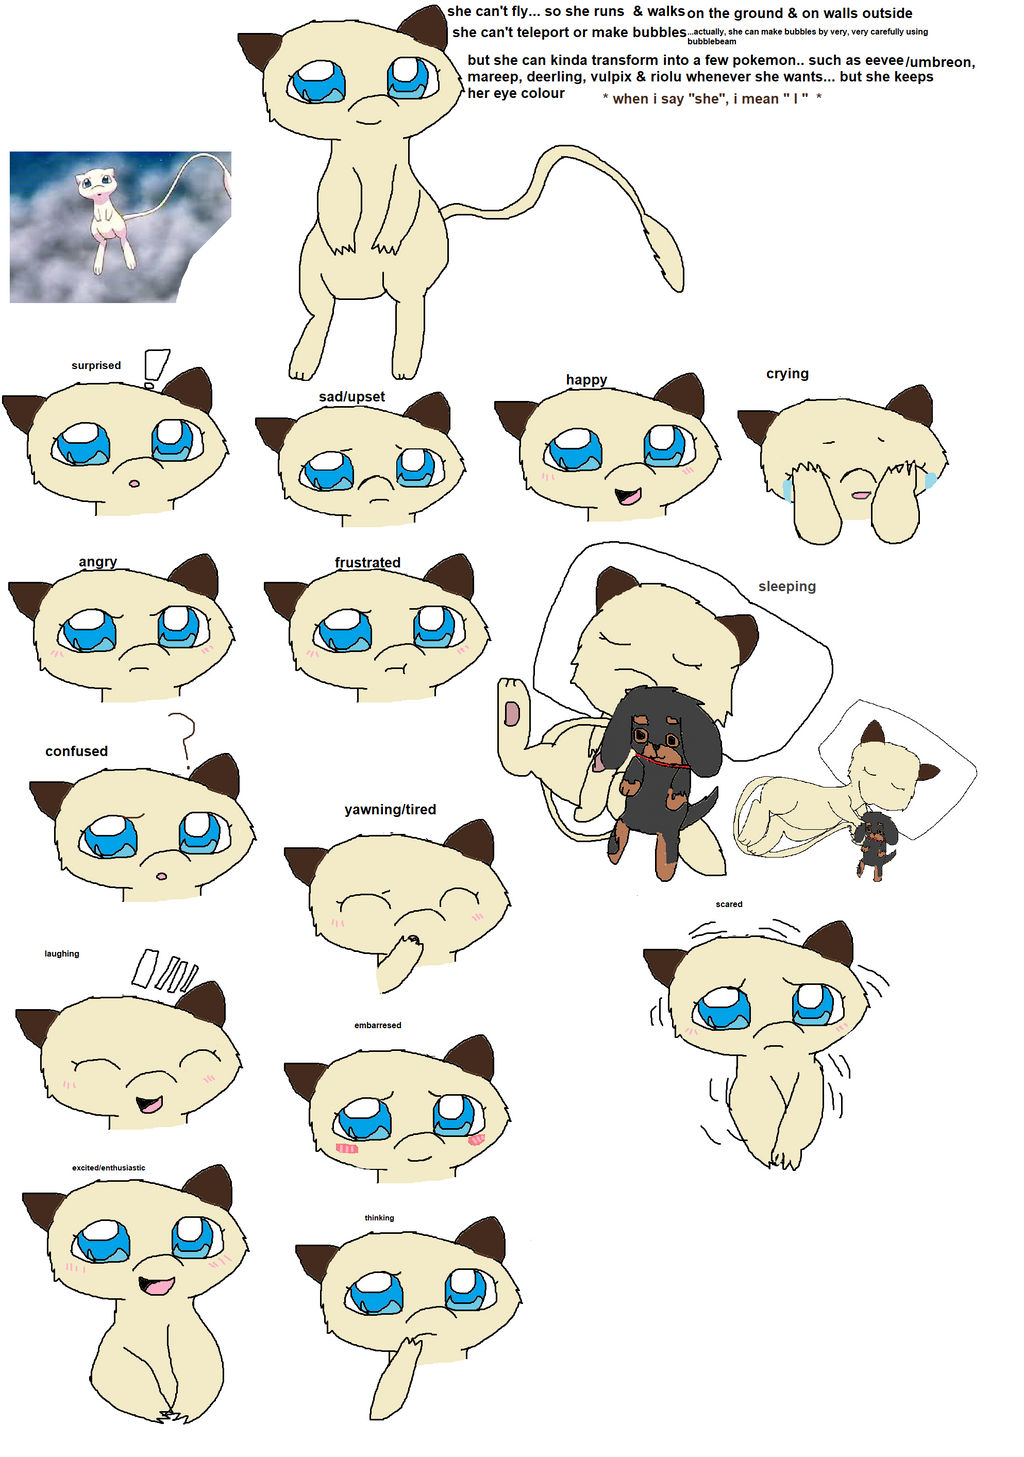 which one do i want to be - please help me choose... is it eevee - umbreon,  riolu or mew?  *edit: i am now a mew? *